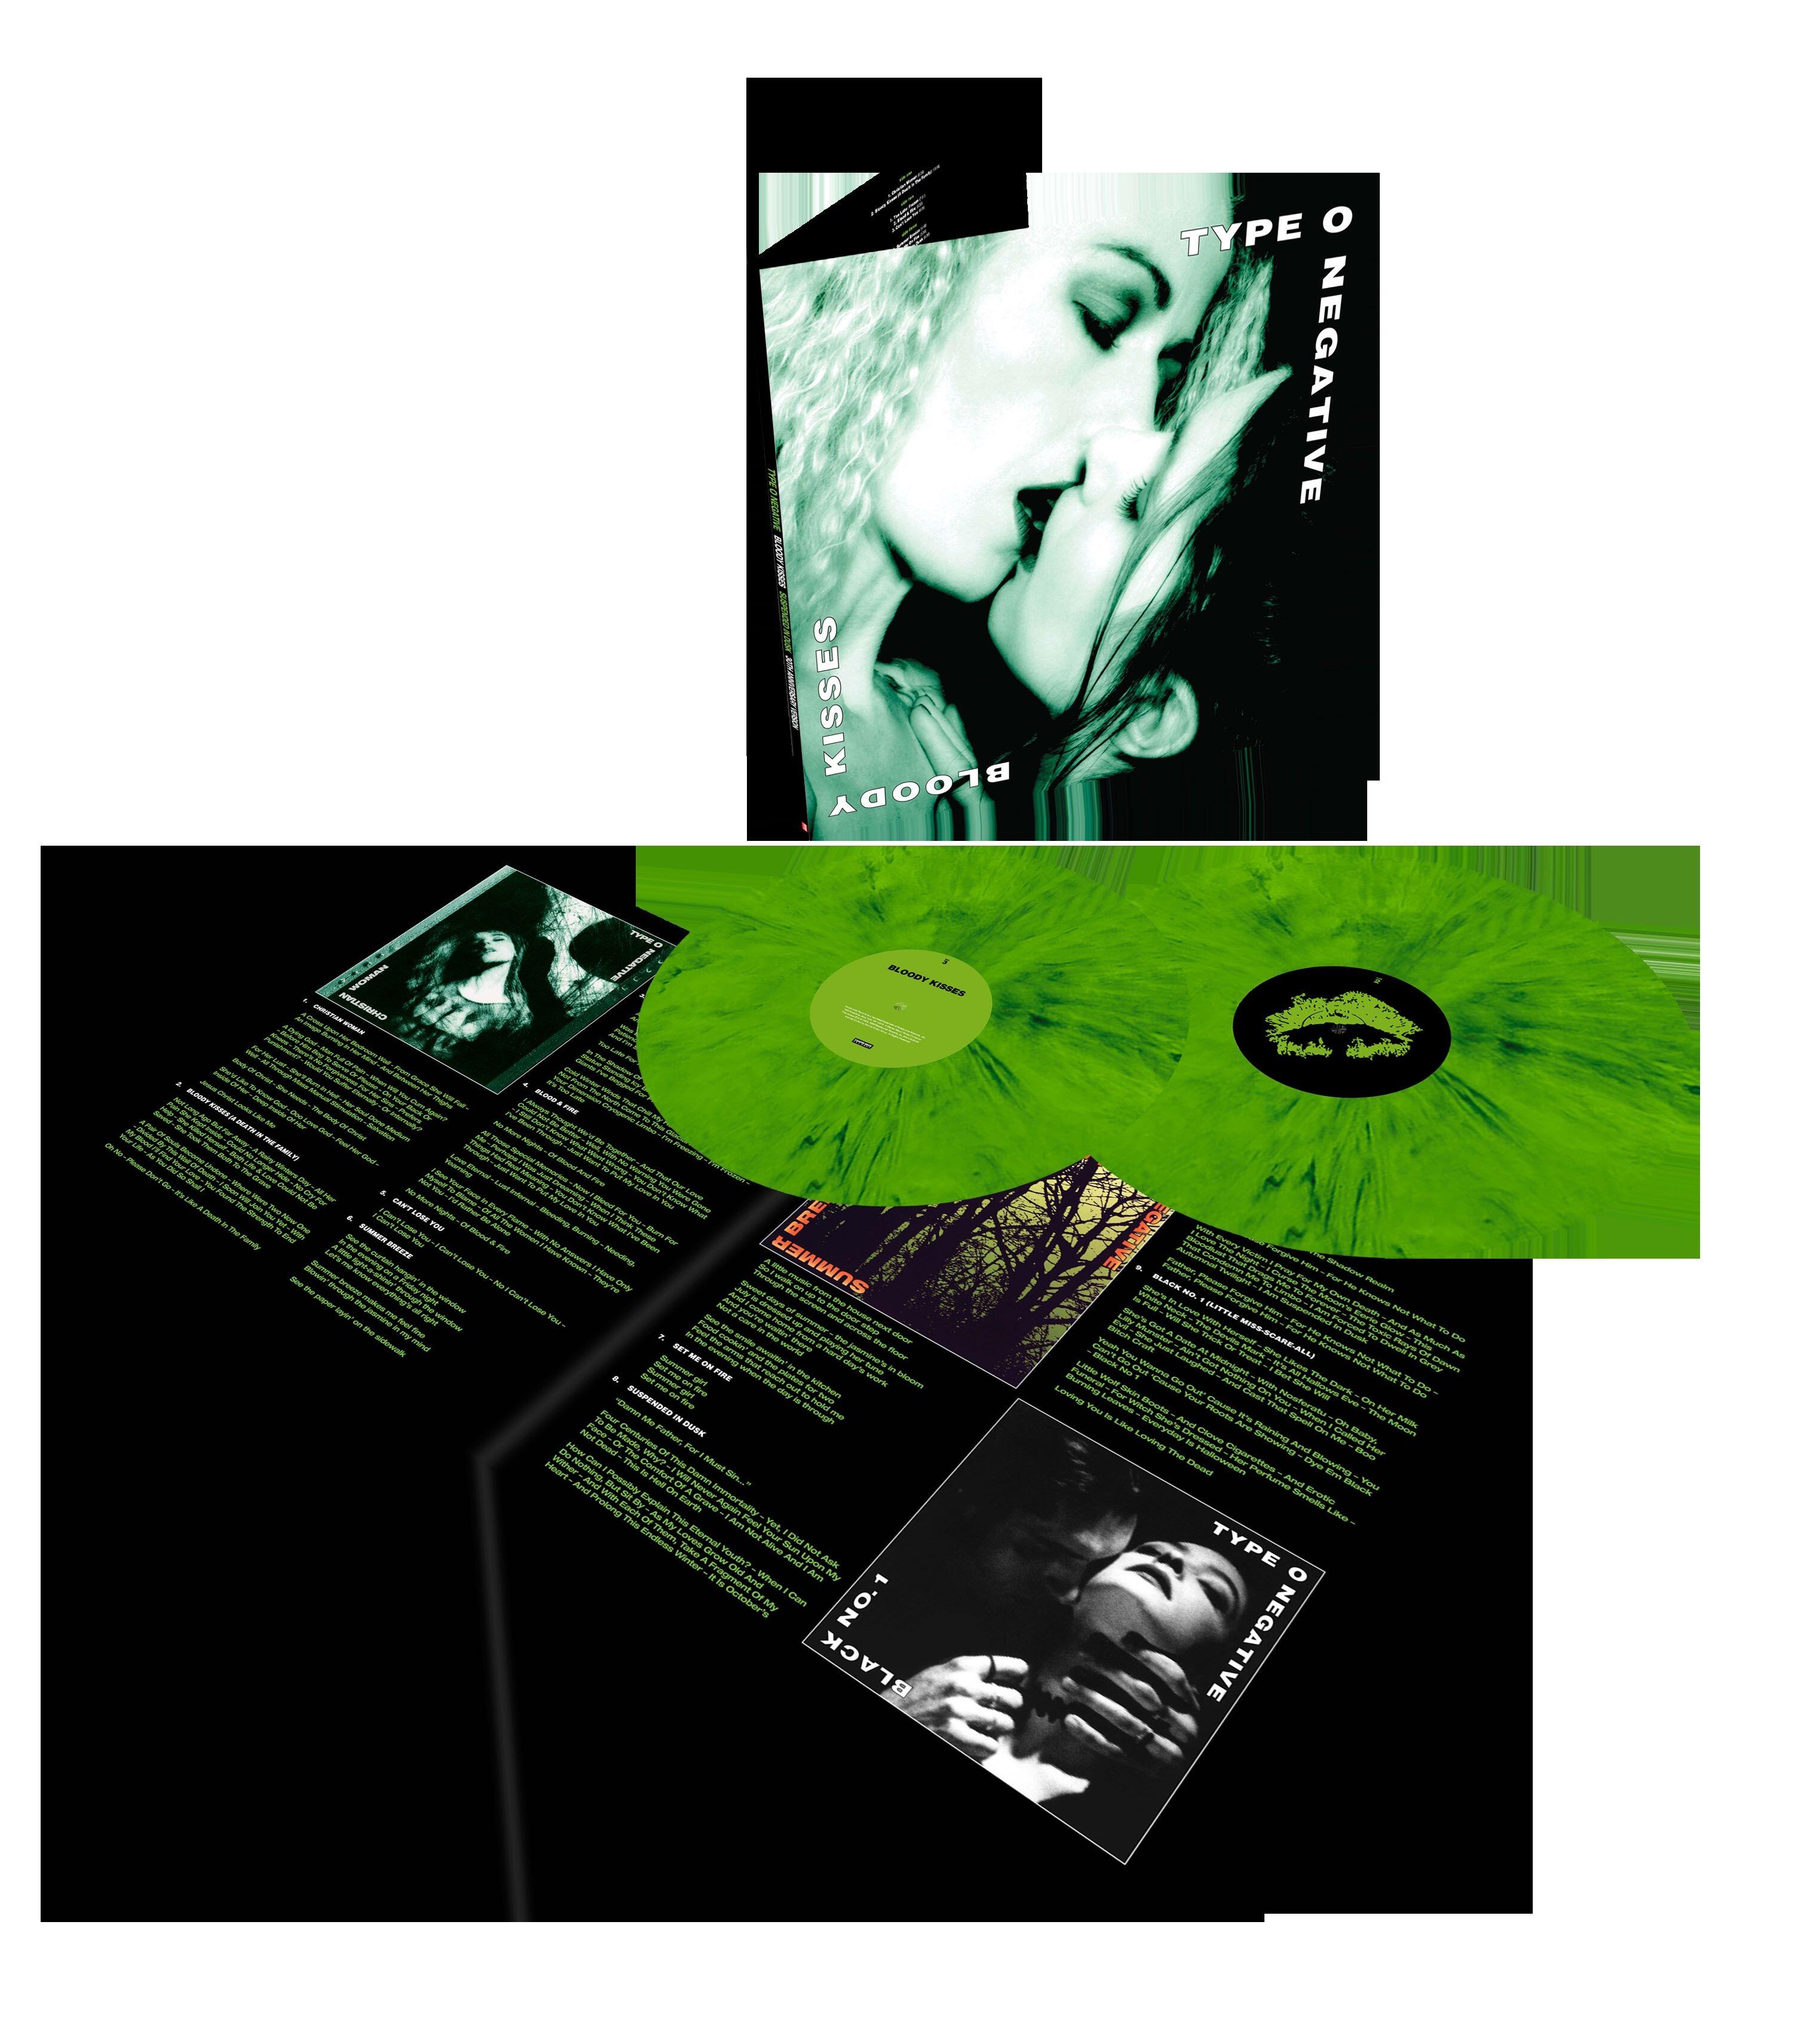 Type O Negative Bloody Kisses: Suspended in Dusk (30th Anniversary) 2LP ( Green & Black Mixed Vinyl)